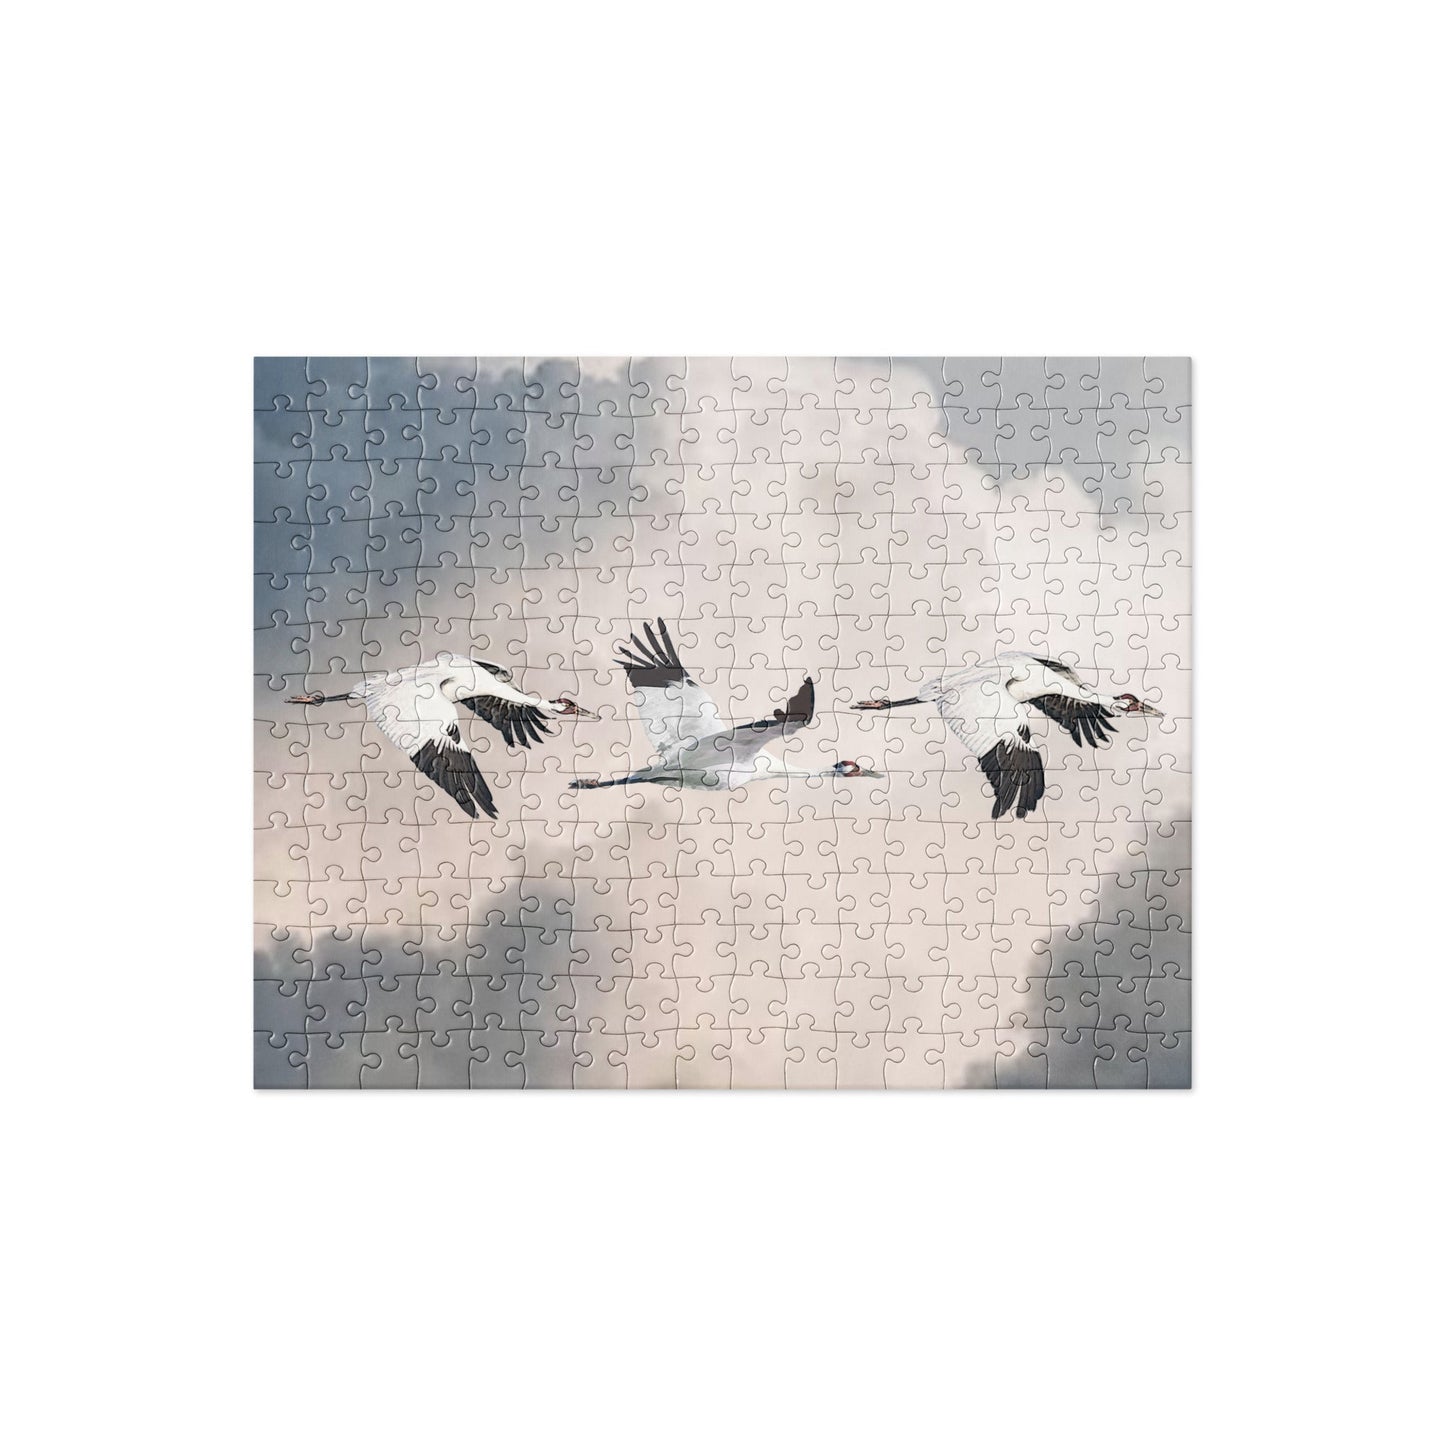 Whooping Cranes Jigsaw Puzzle